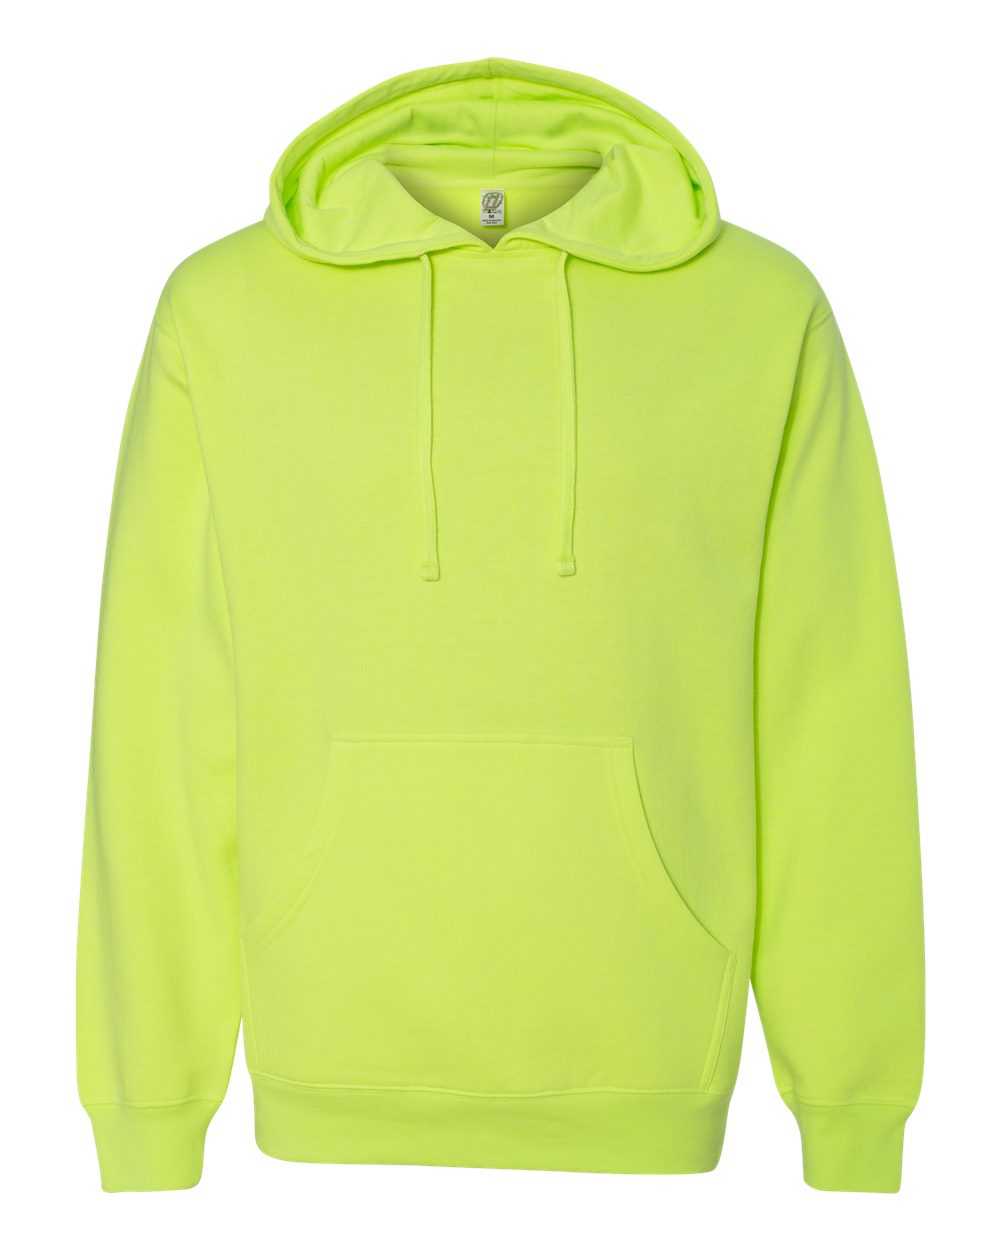 Independent Trading Co. Midweight Hooded Sweatshirt SS4500 #color_Safety Yellow